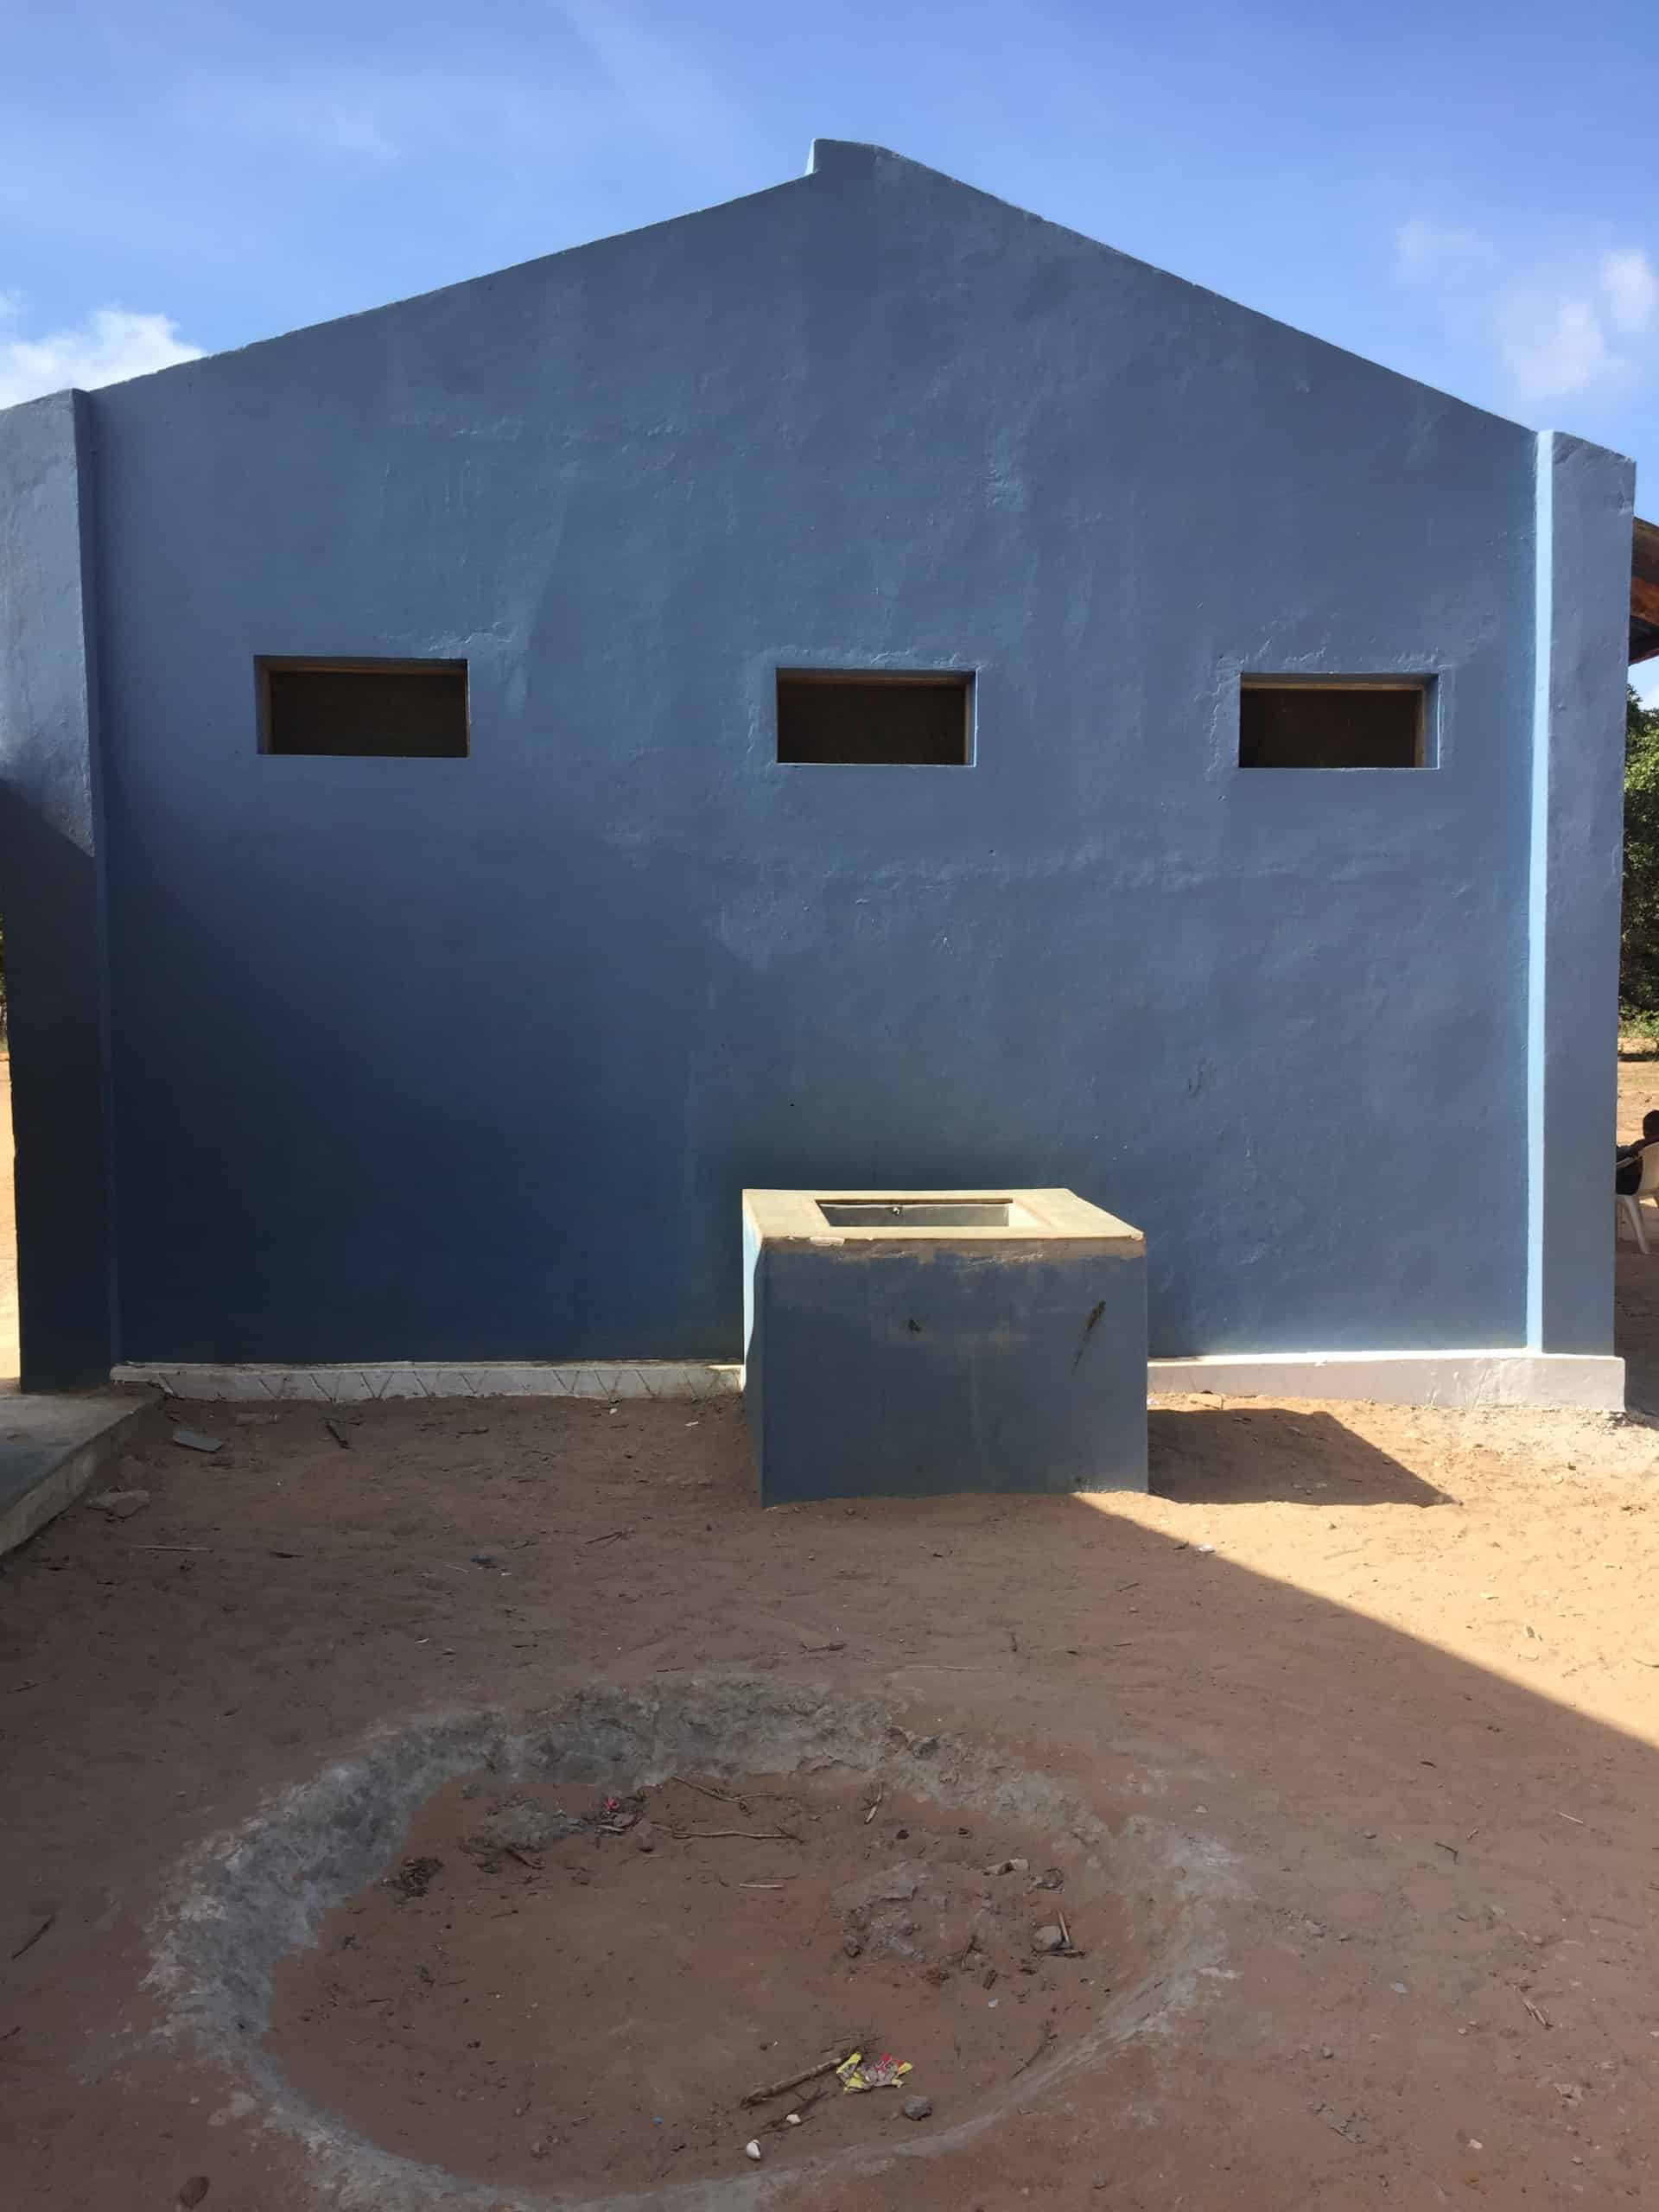 African school backyard where the desalination unit will be placed